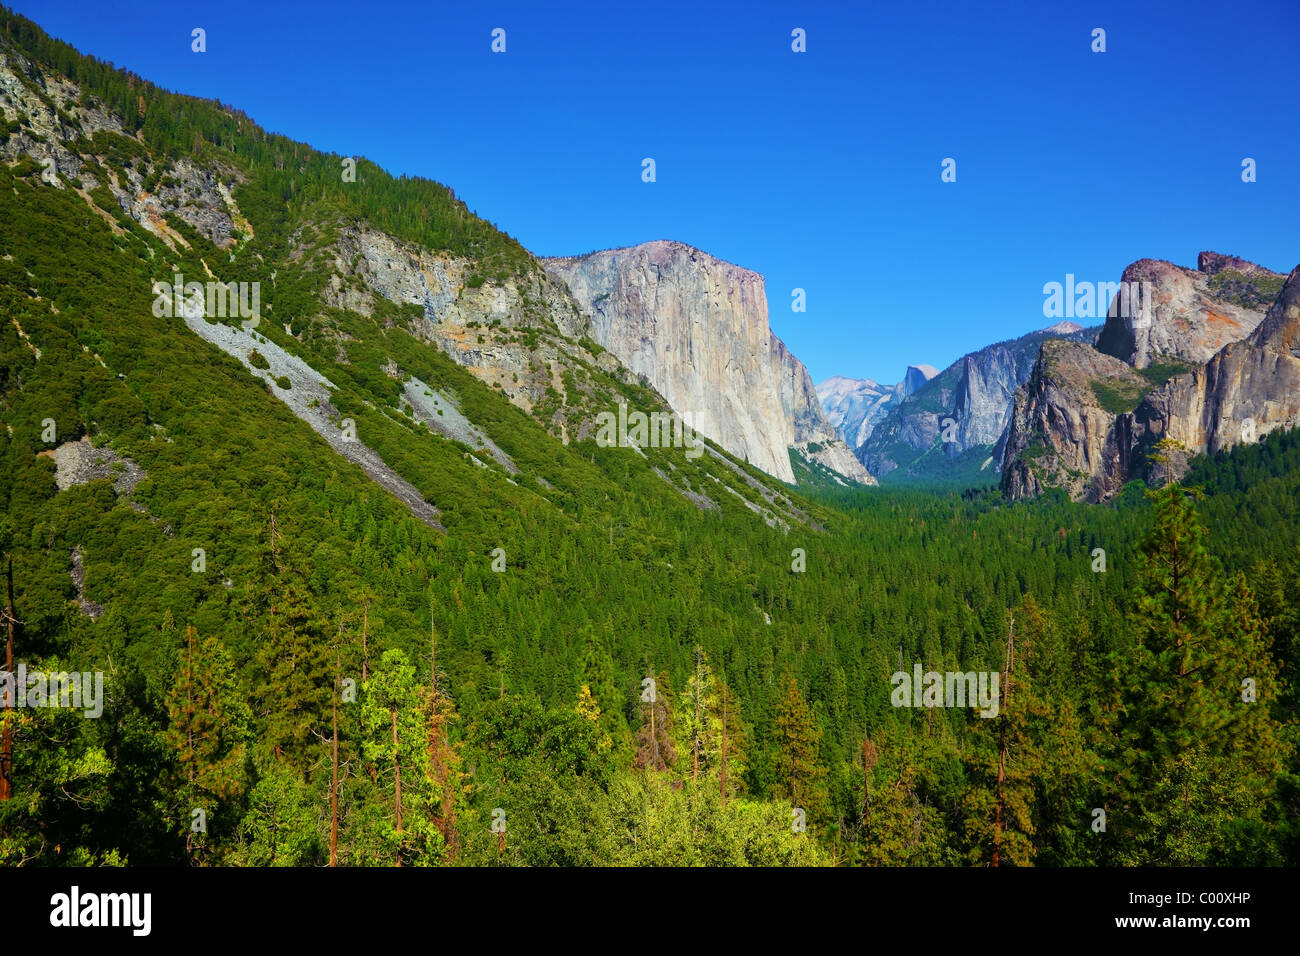 The well-known rocky monolith El-Captain shined by the morning sun. Yosemite park Stock Photo